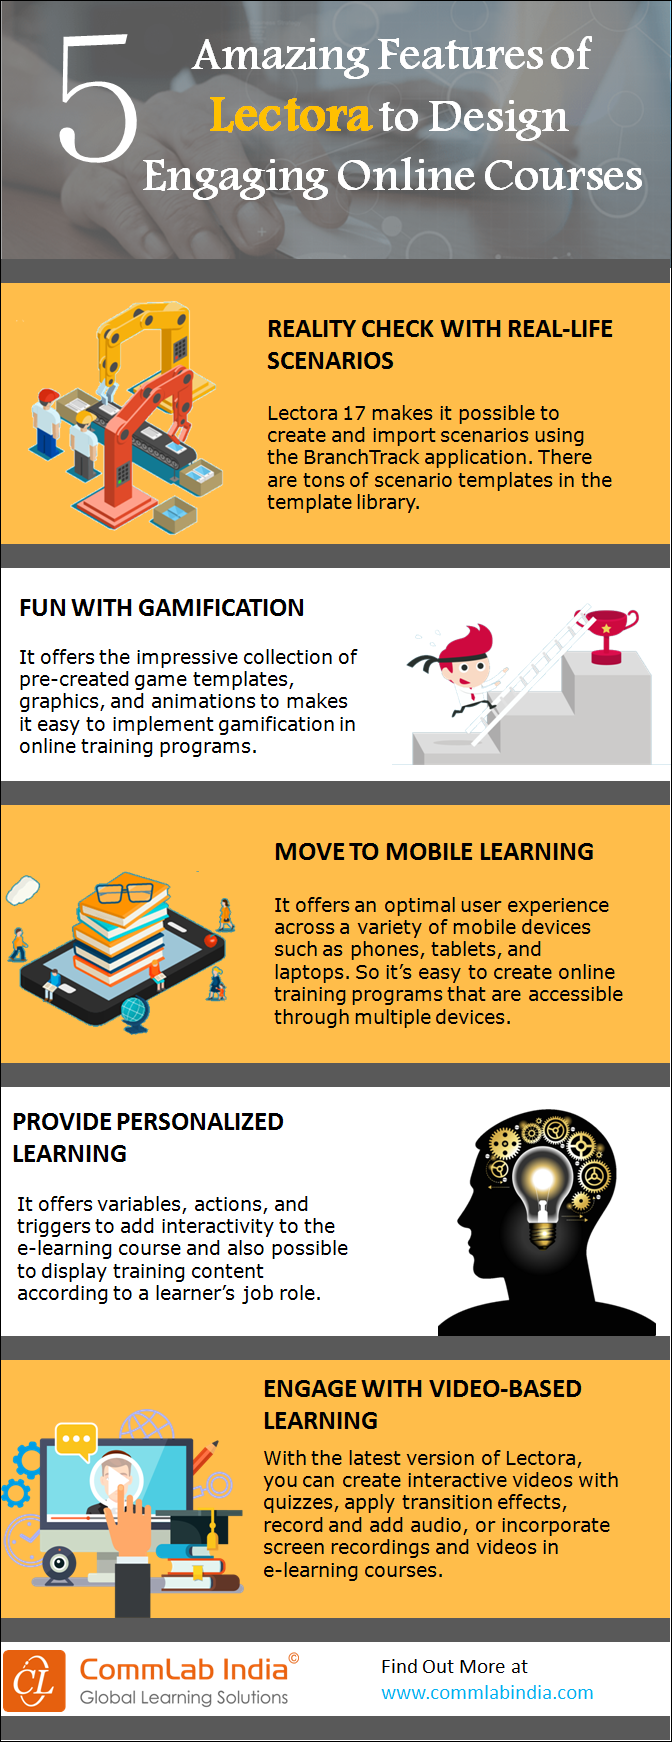 5 Amazing Features of Lectora to Design Engaging Online Courses [Infographic]